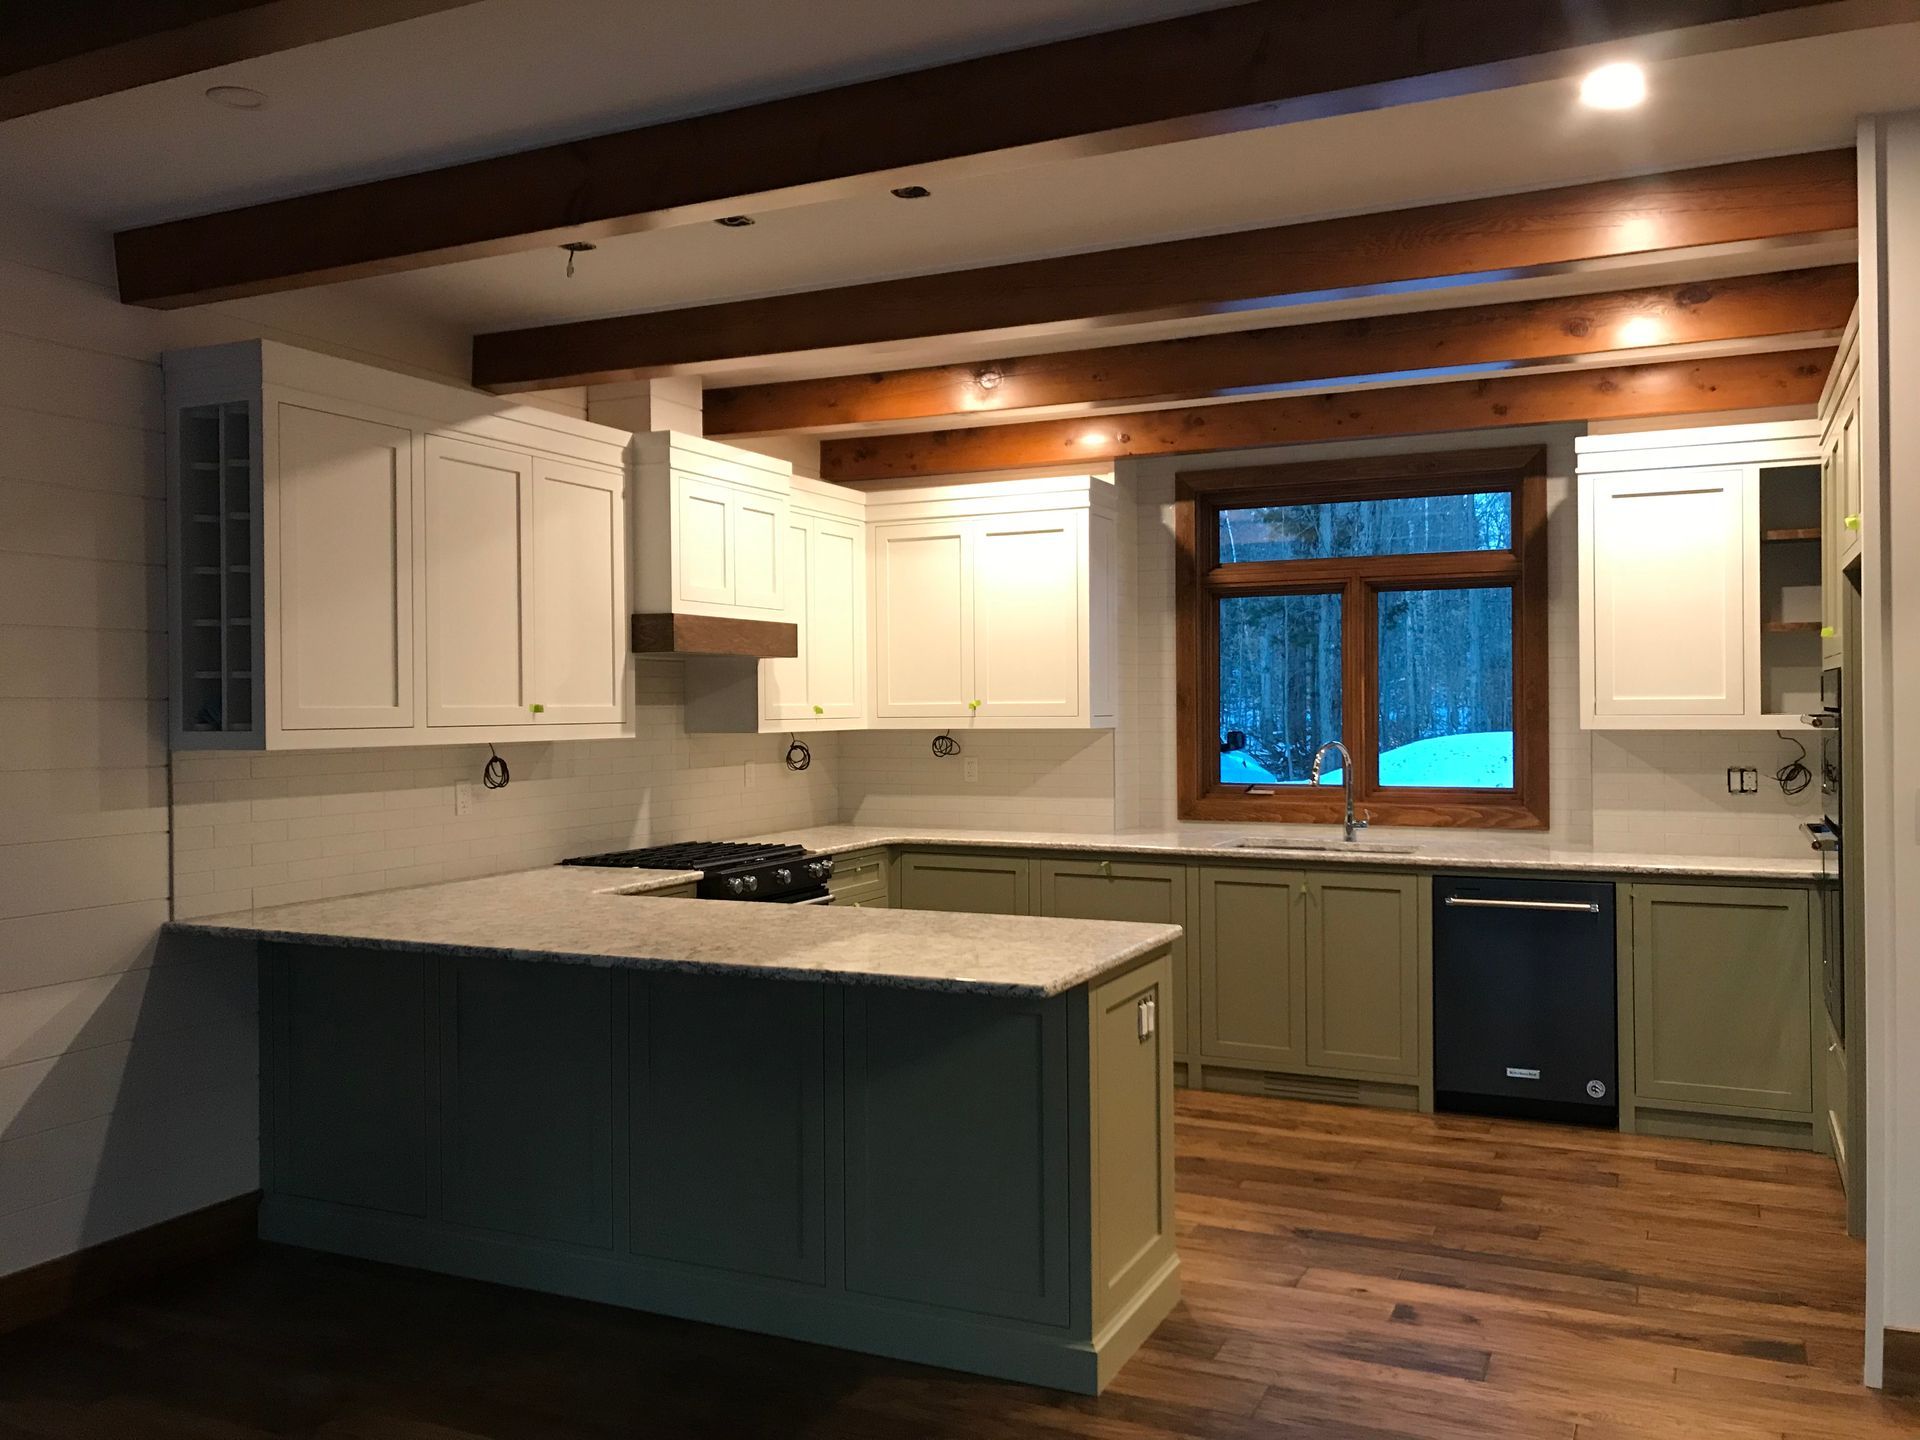 Almost finished kitchen showing ceiling beams and ample counter space.